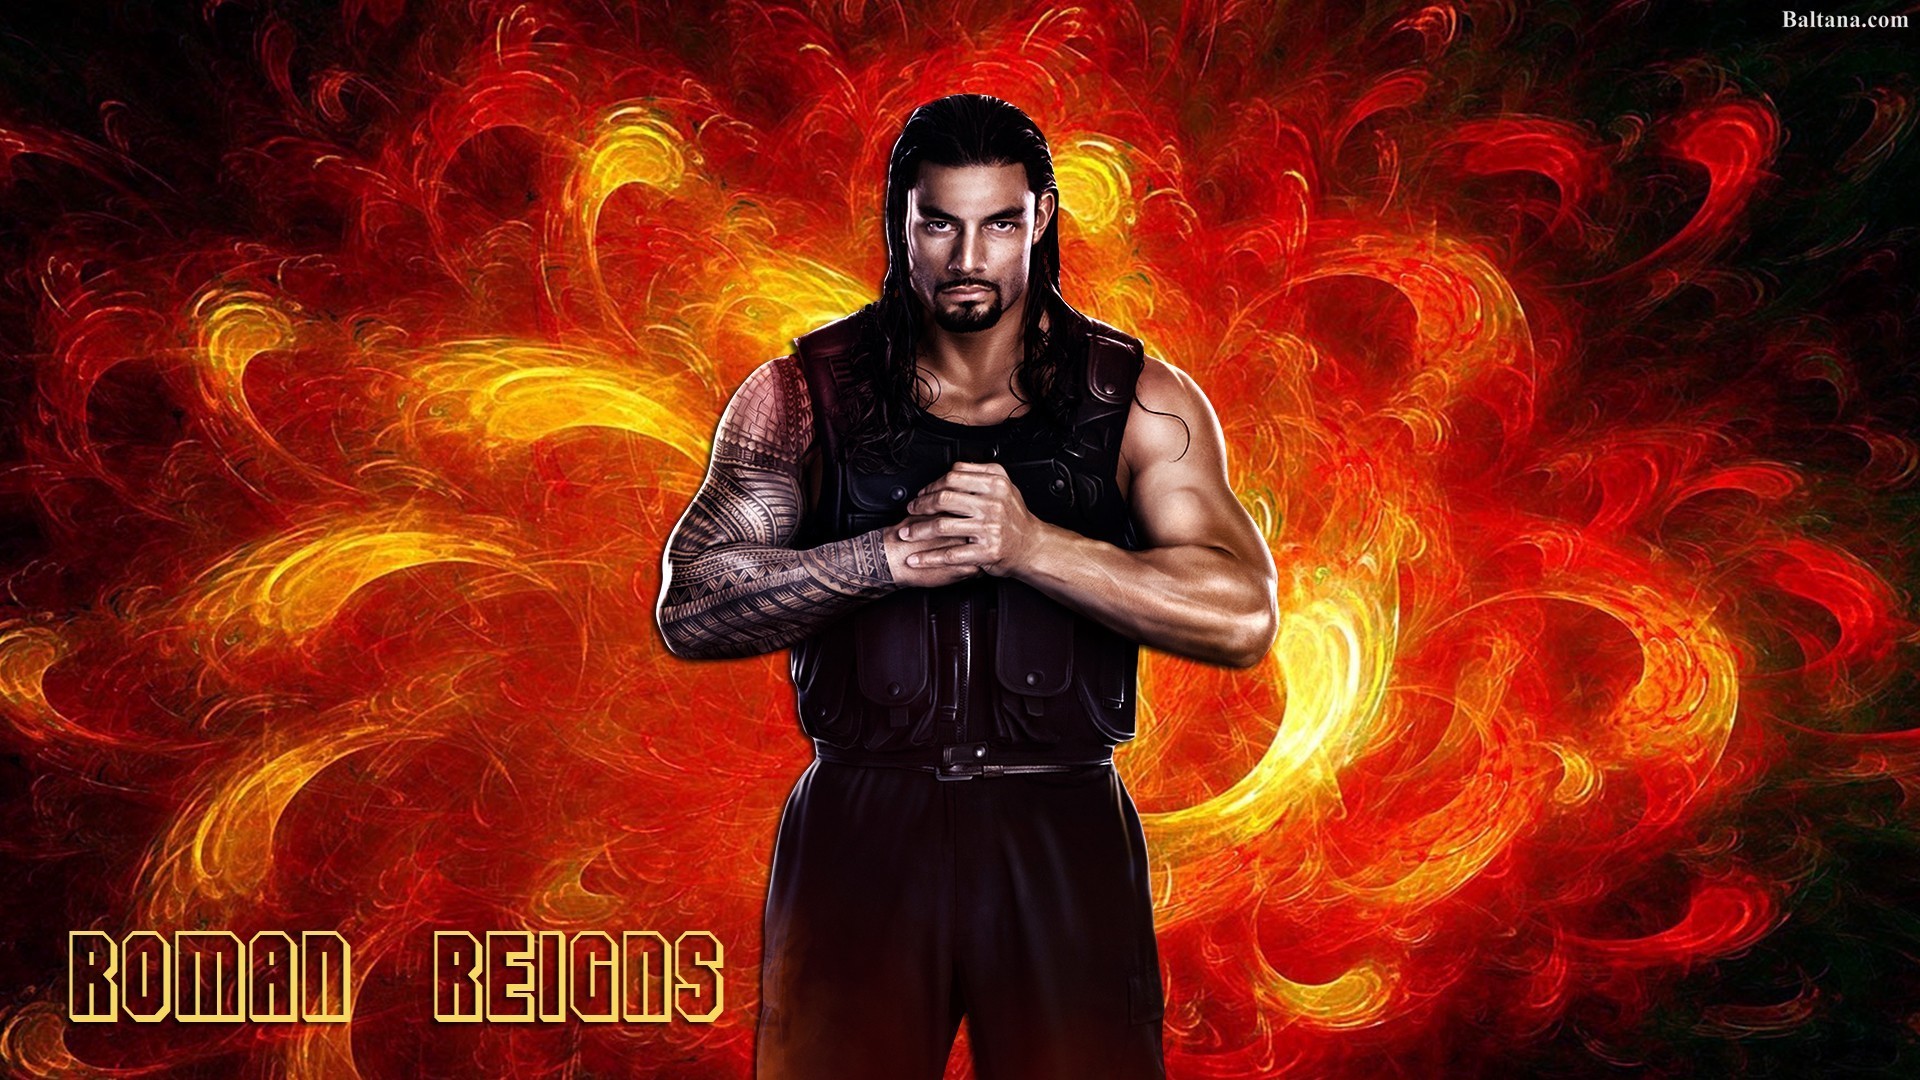 1920x1080 1920x1200 Roman Reigns Wwe Hd Images In Laptop Size Wallpaper Full Pics For  Desktop Superstar Latest And